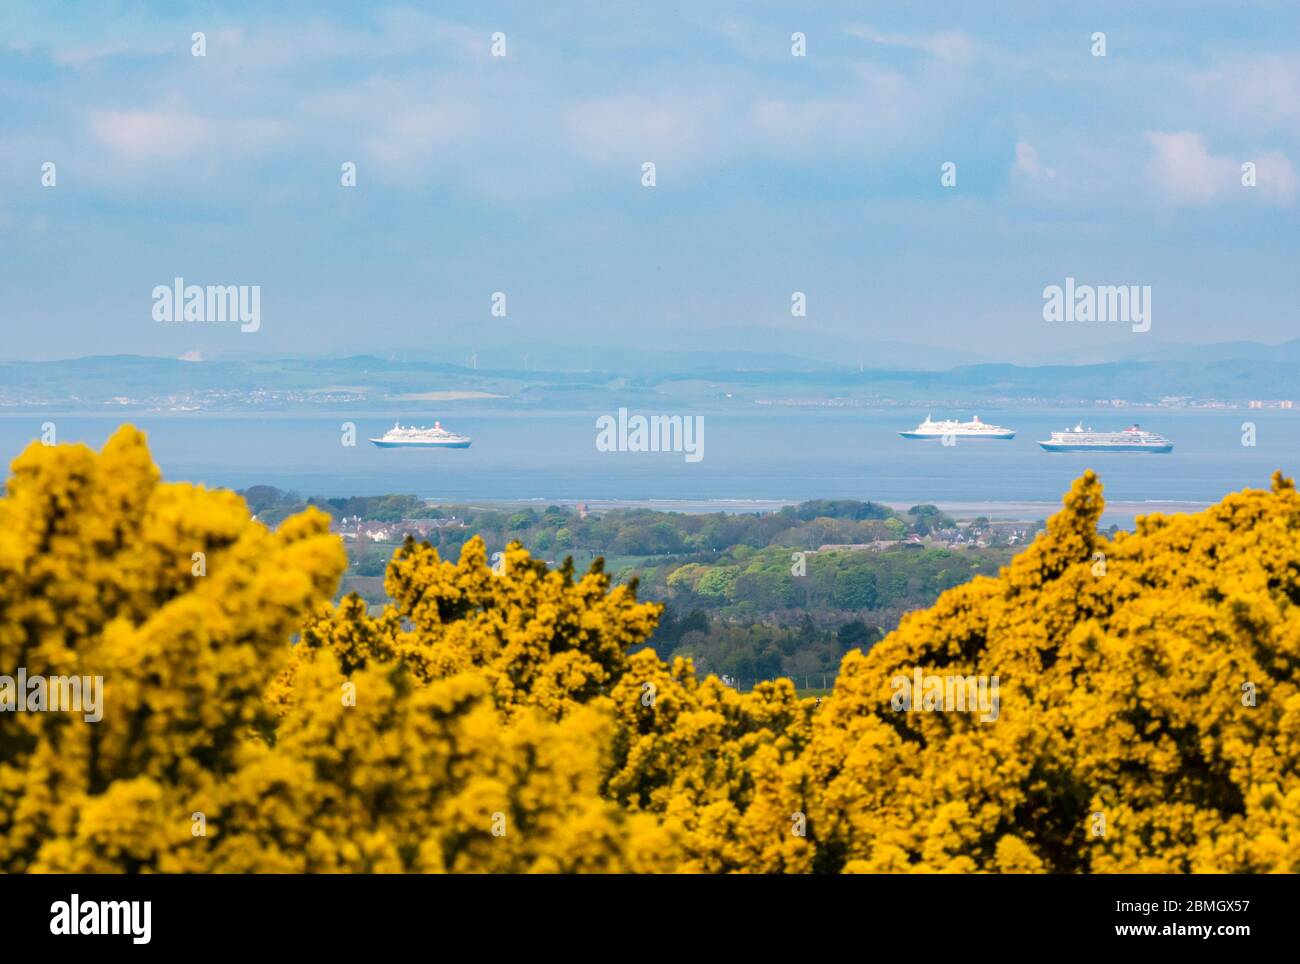 Fred Olsen cruise ships anchored in Firth of Forth during Covid-19 Coronavirus pandemic lockdown seen through yellow gorse, East Lothian, Scotland, UK Stock Photo